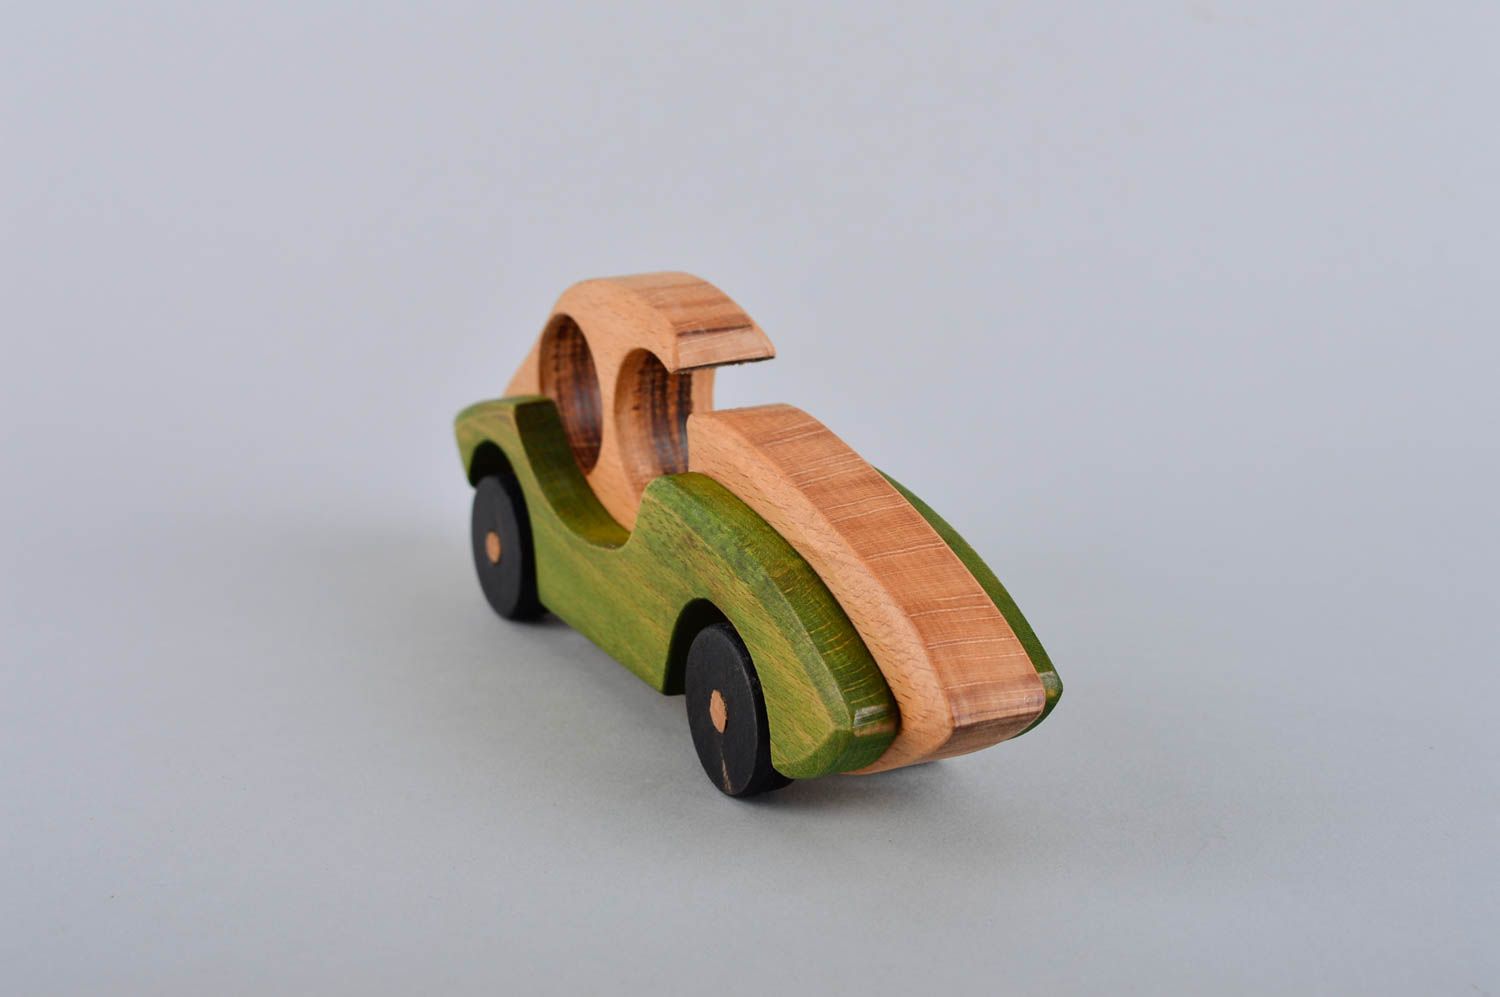 Wooden toy unusual toy for kids designer toy gift ideas nursery decor photo 3